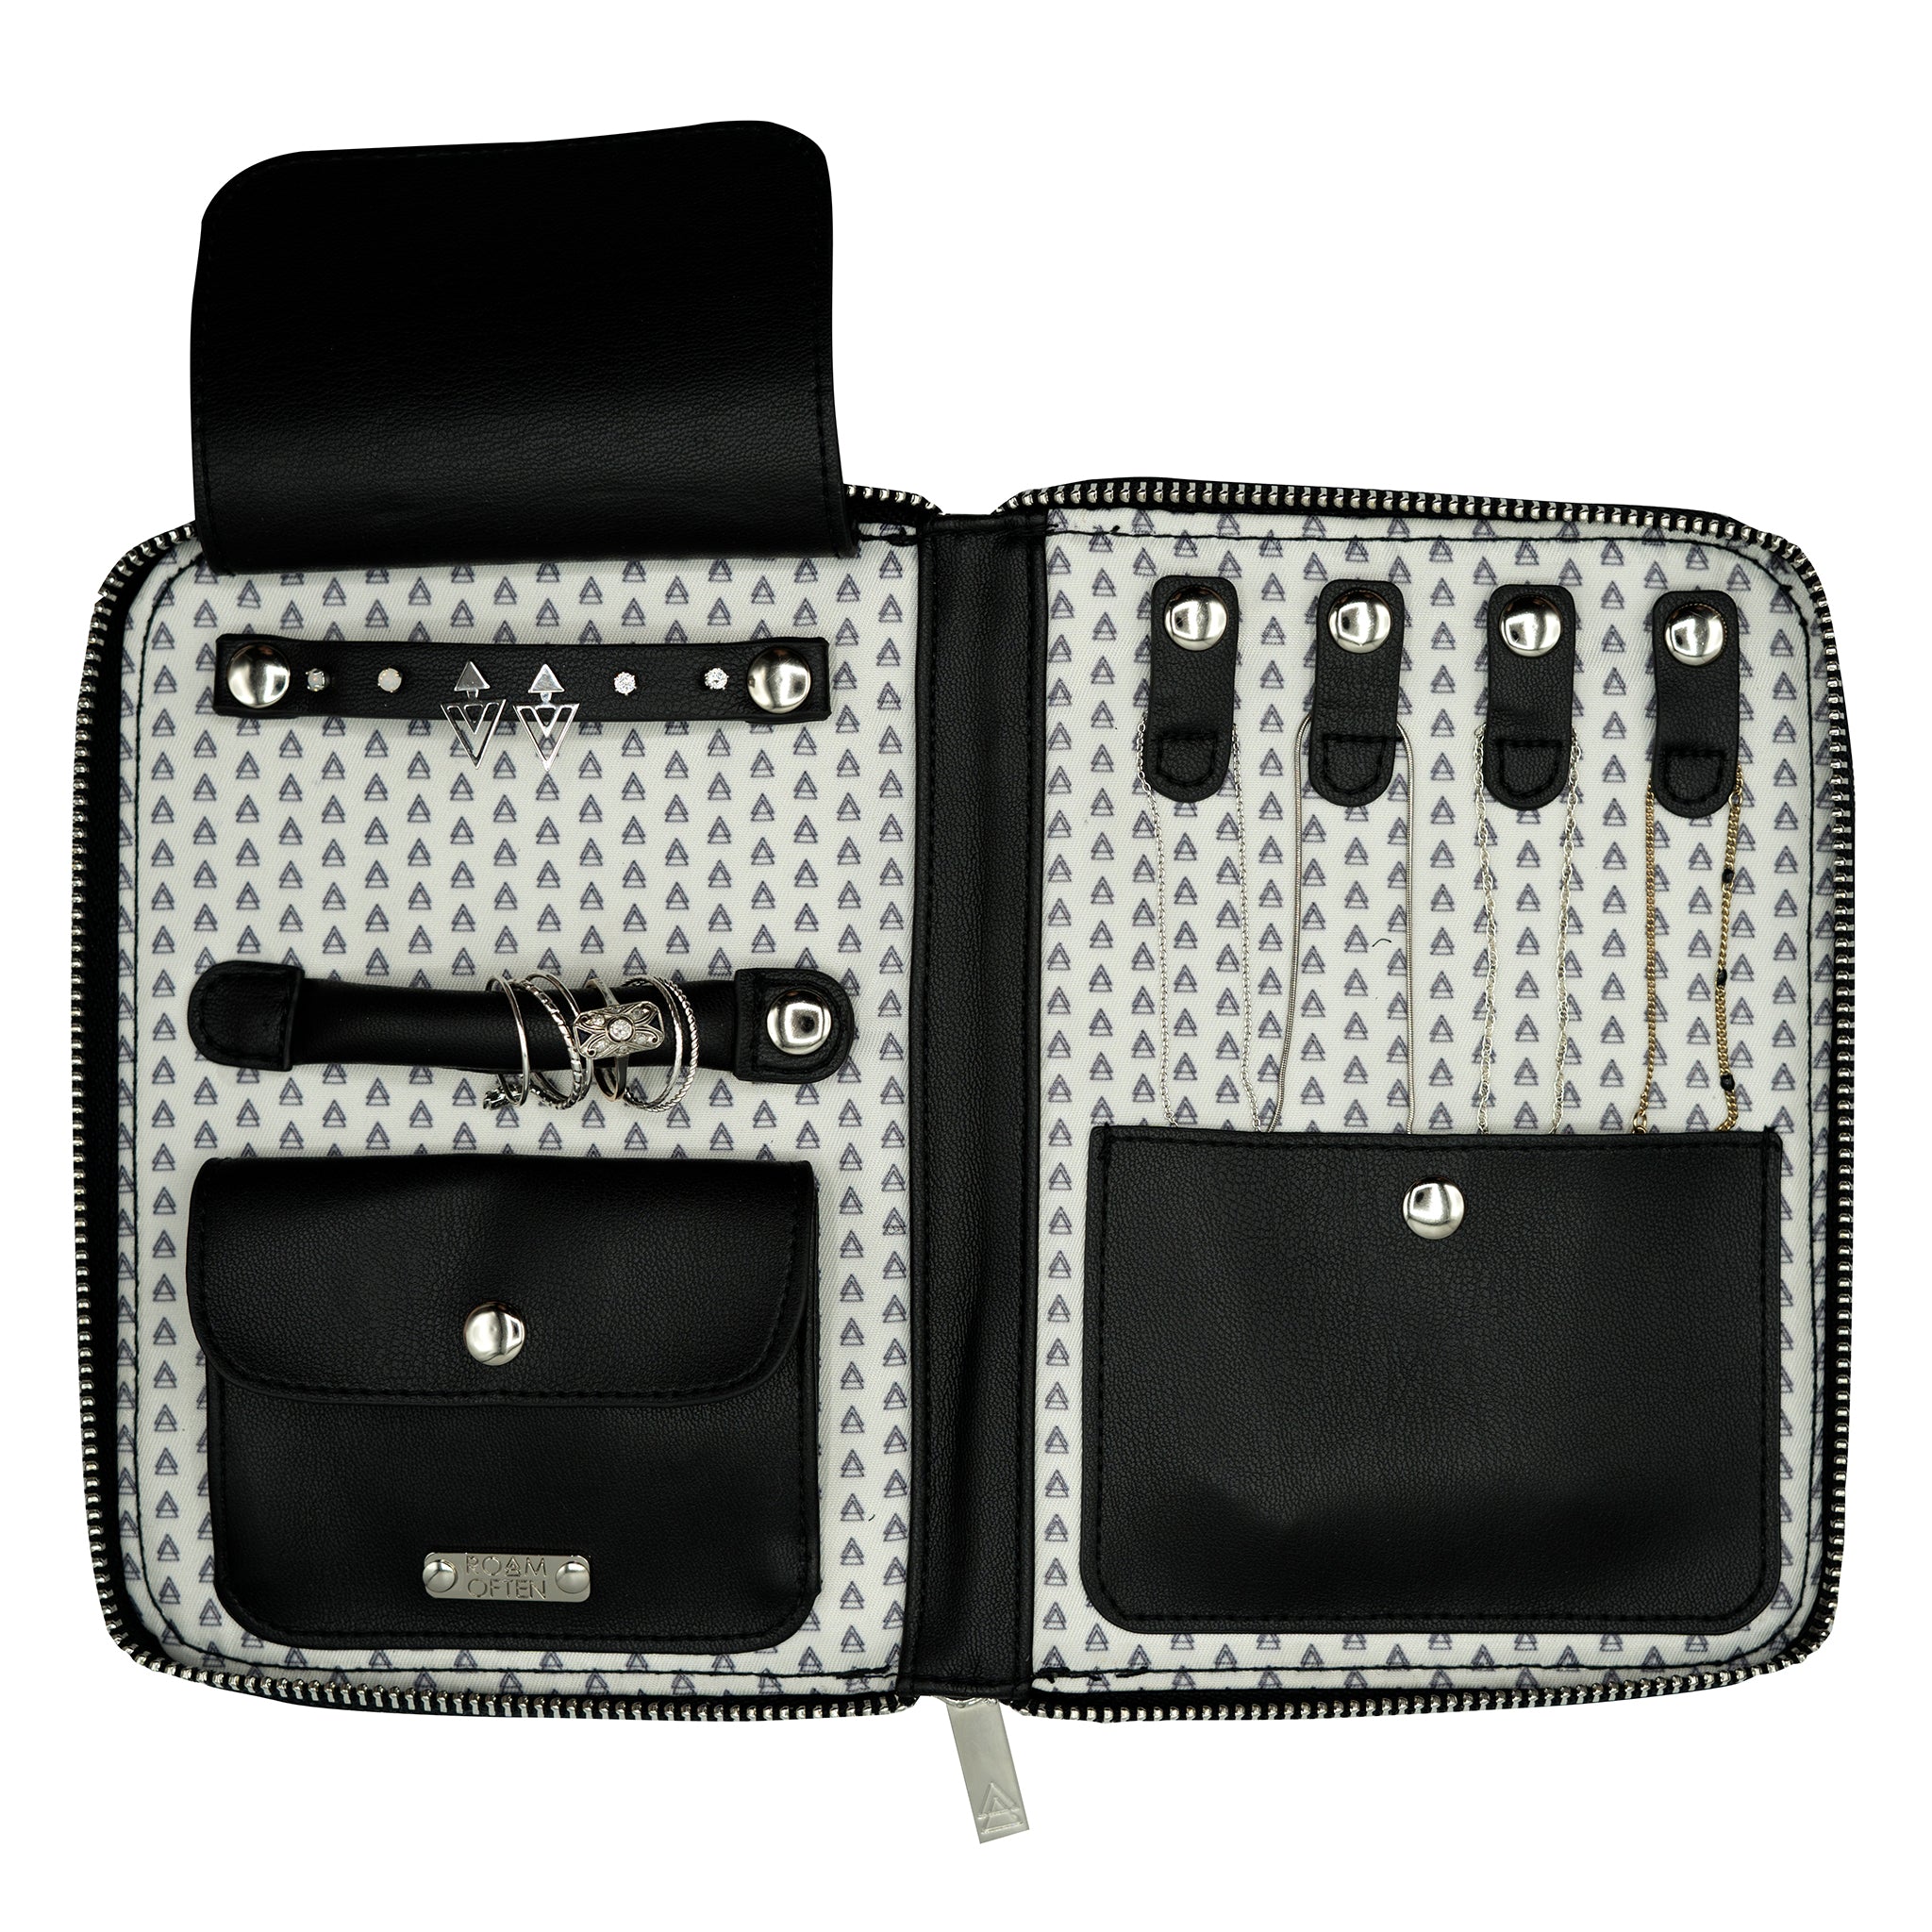 Jewelry Travel Organizer/Case. The Best Cases/Organizers in 2022